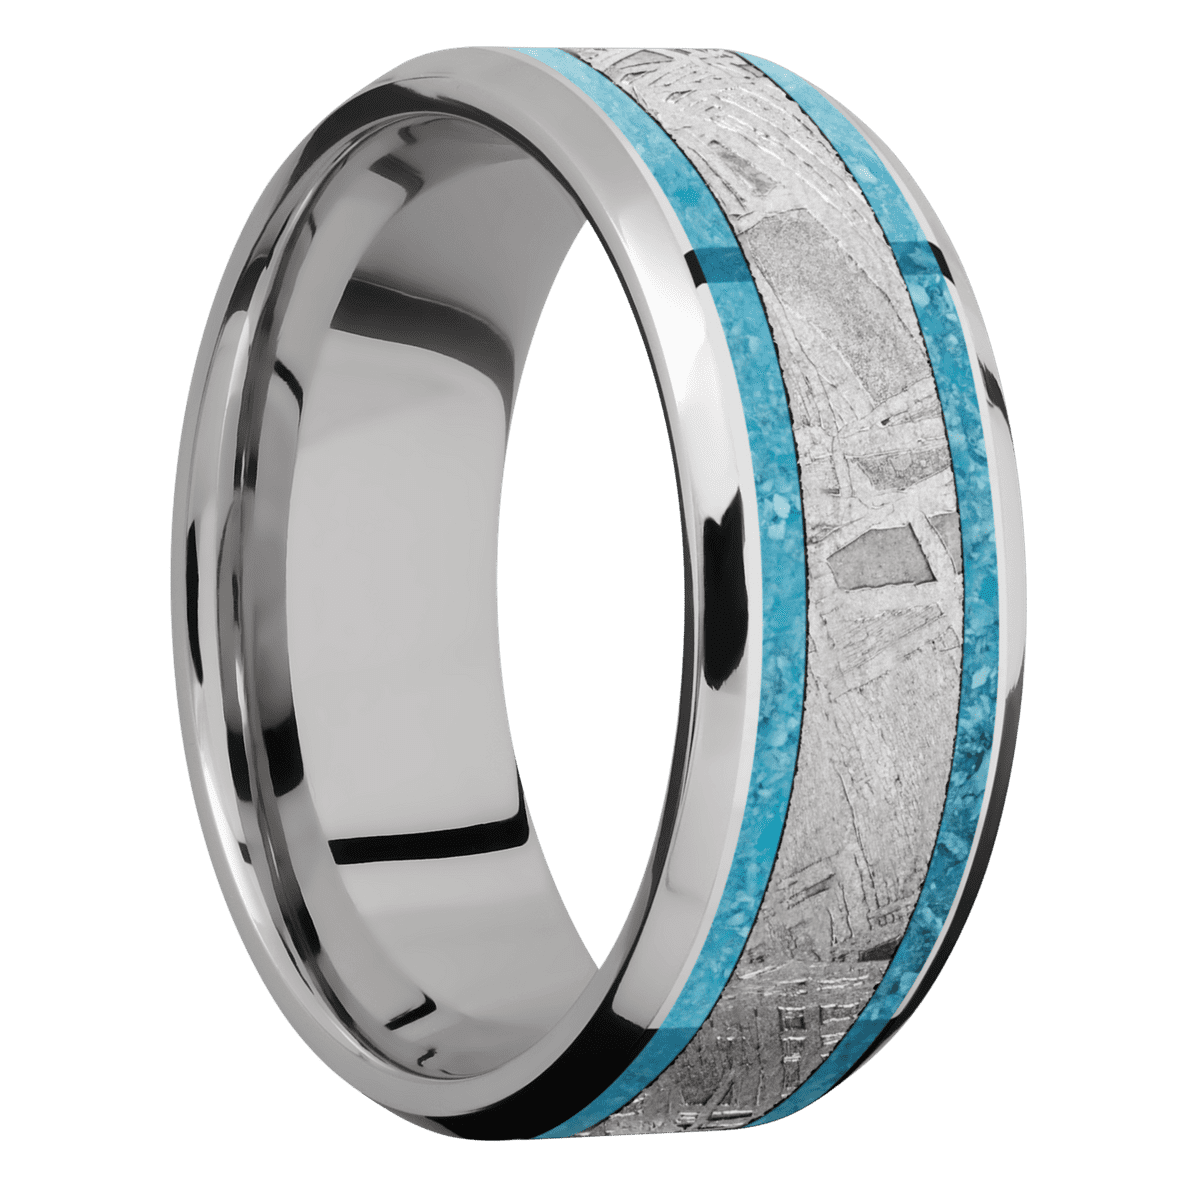 8 mm wide/Beveled/Cobalt Chrome band featuring inlays of Mosaic and Meteorite.